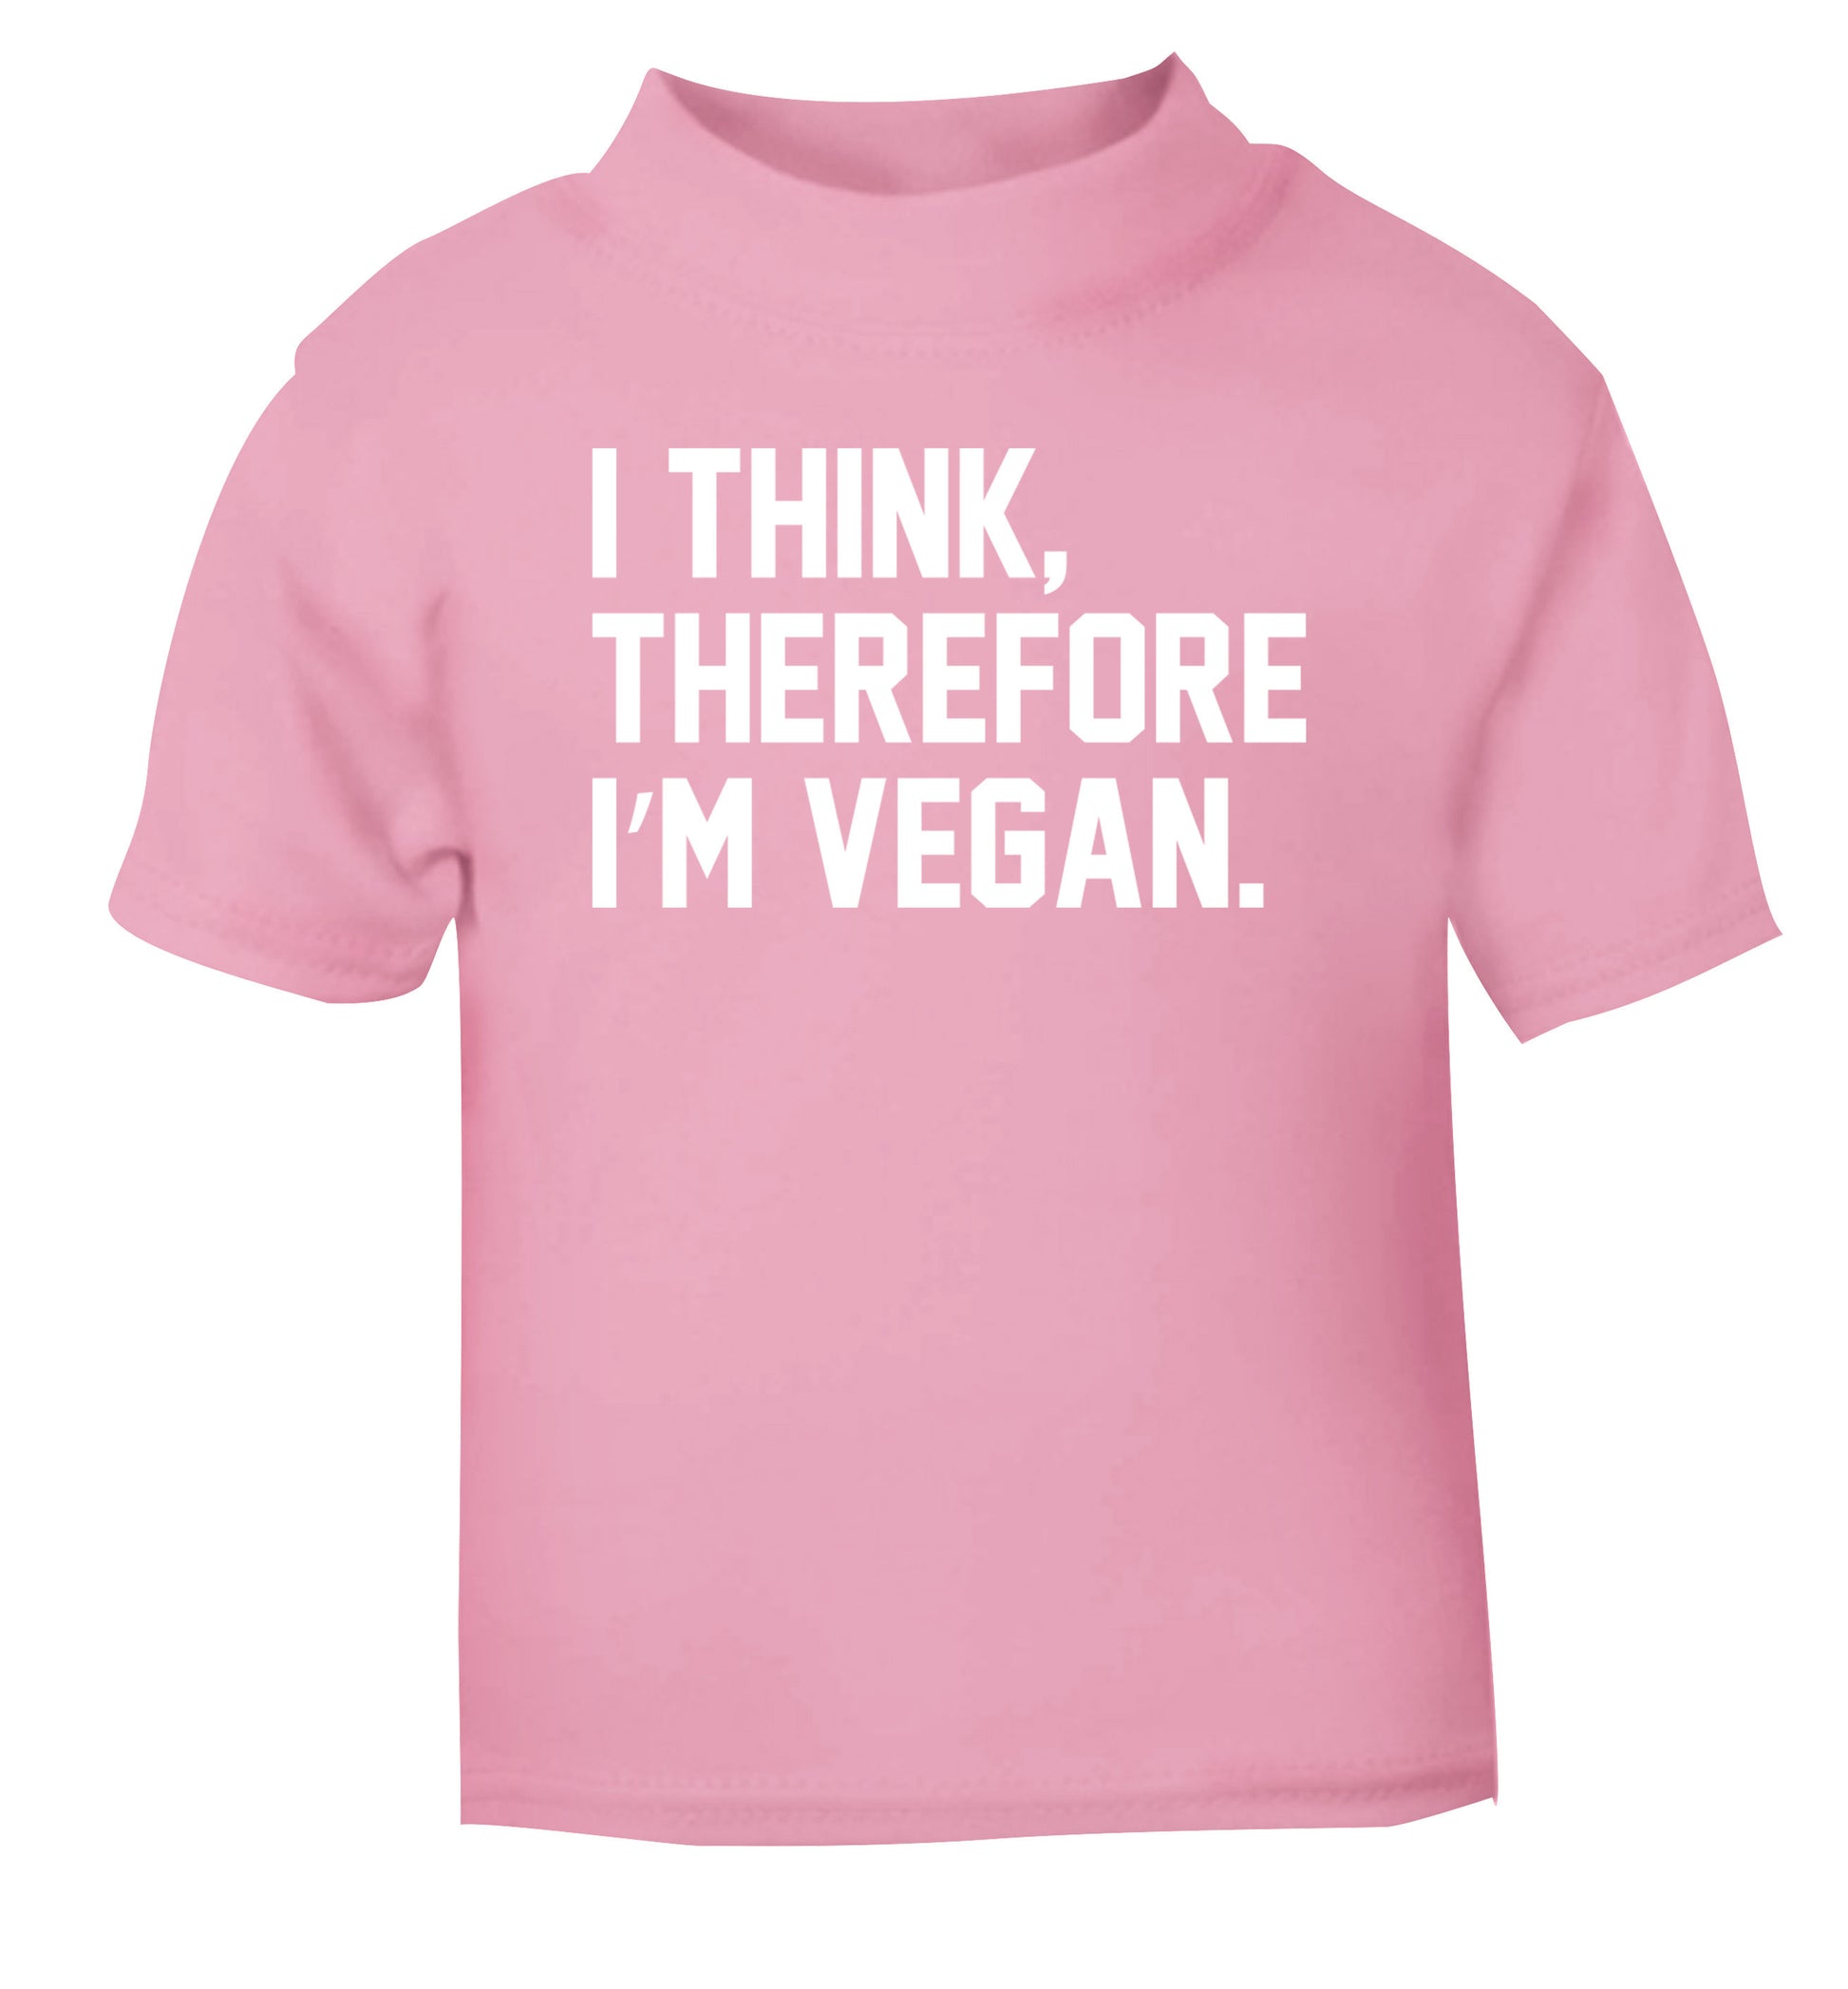 I think therefore I'm vegan light pink Baby Toddler Tshirt 2 Years